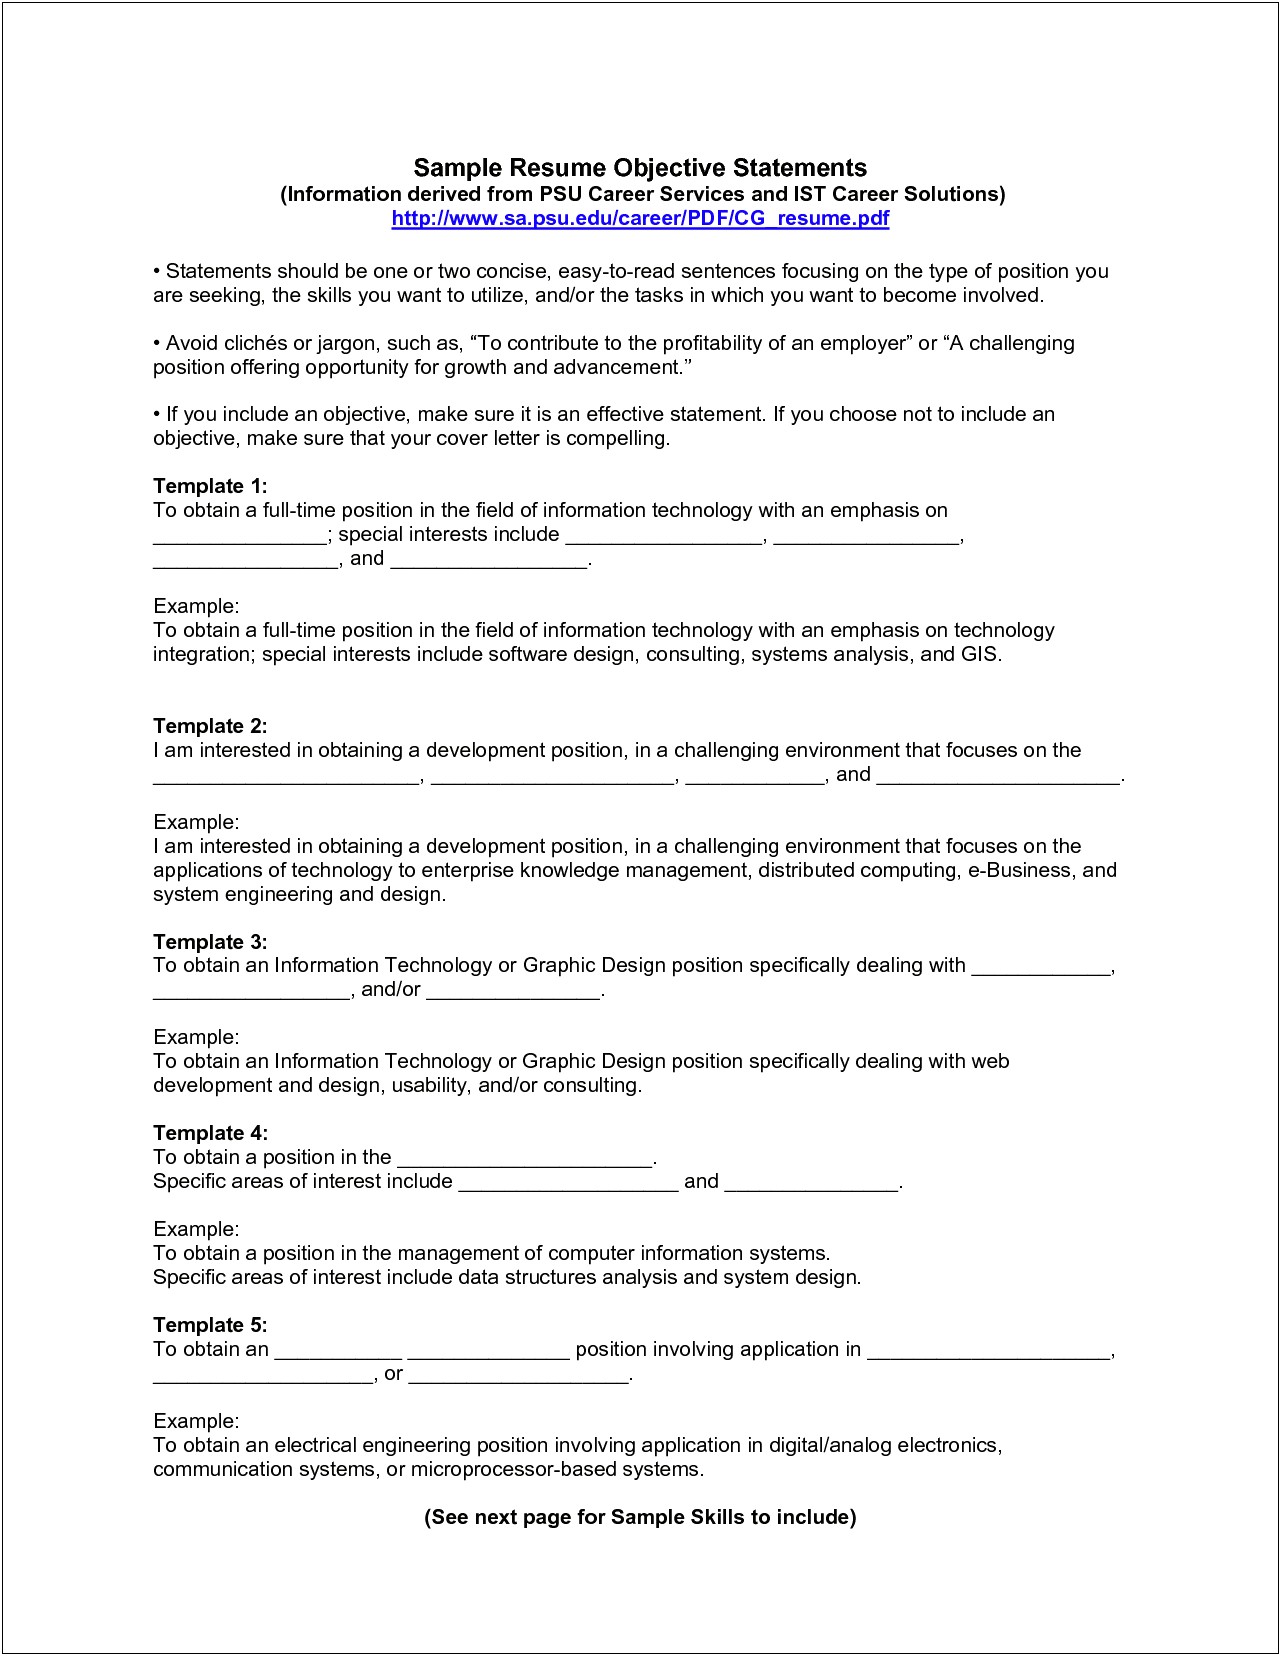 Resume Objective Statement Examples For Healthcare